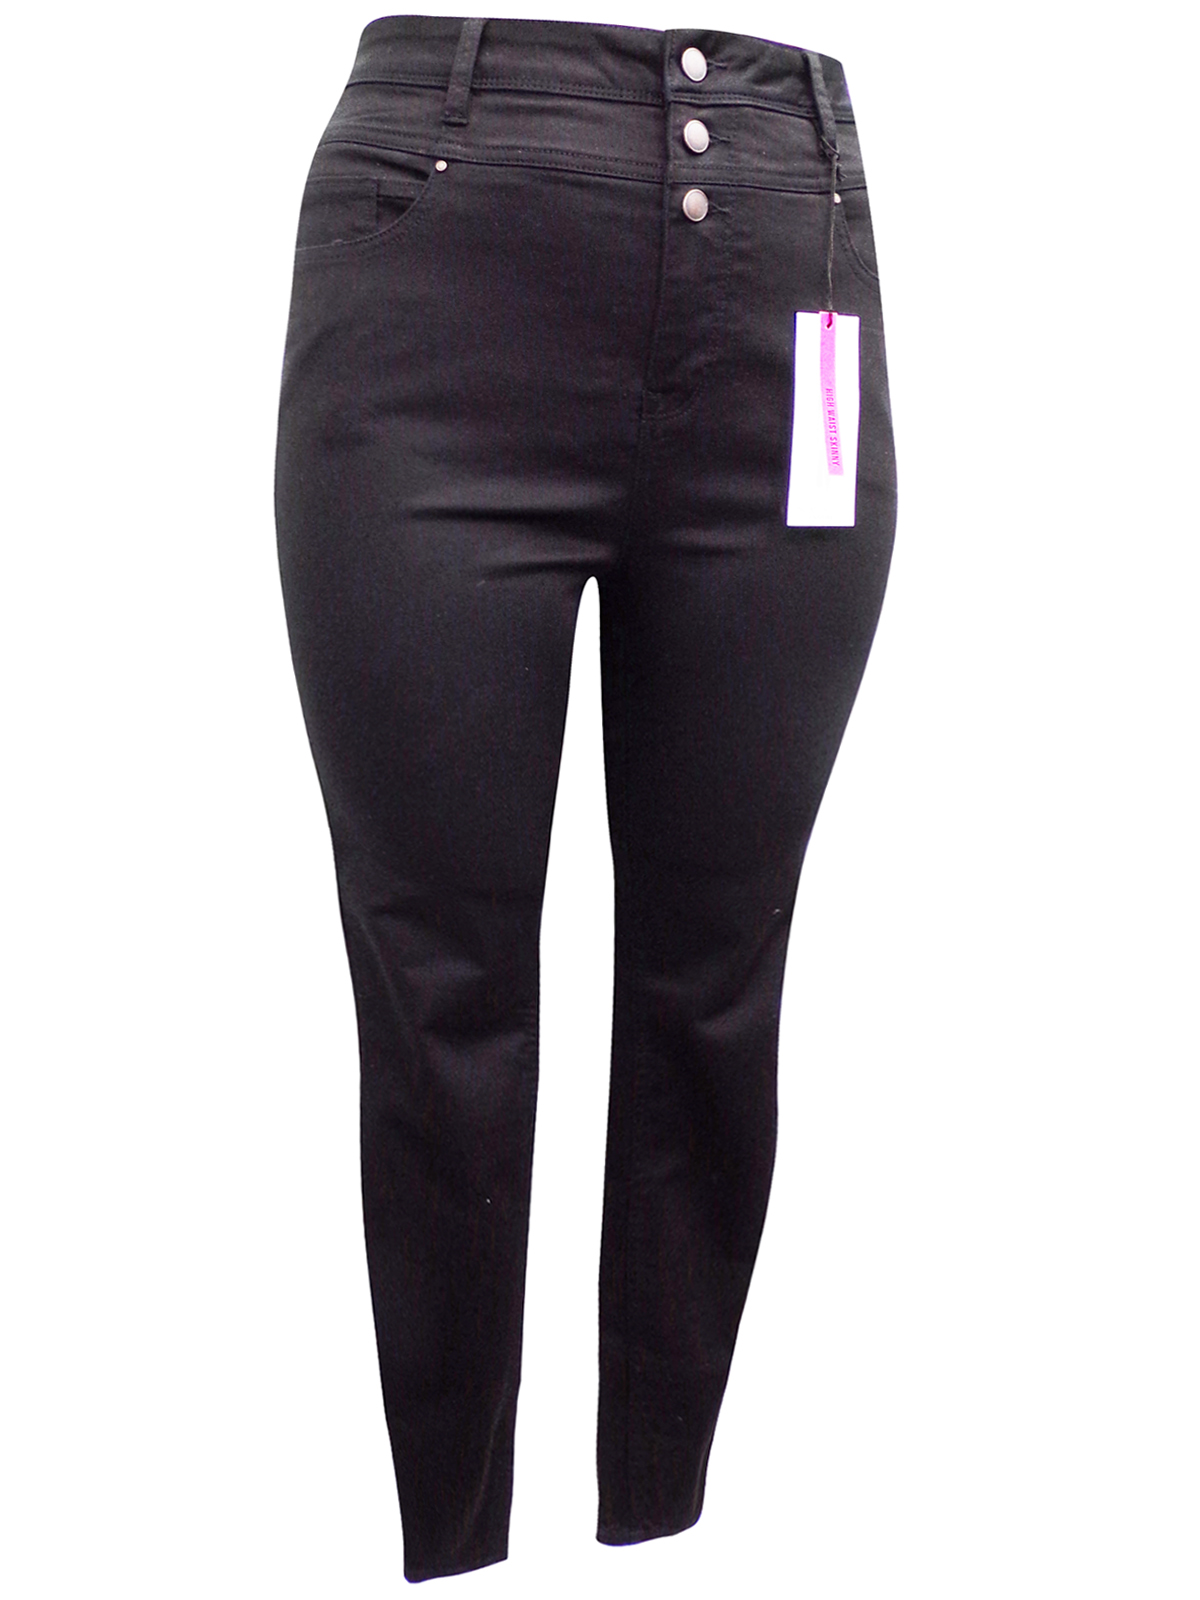 N3w L00k Curve Black High Waisted Skinny Jeans Plus Size 18 To 28